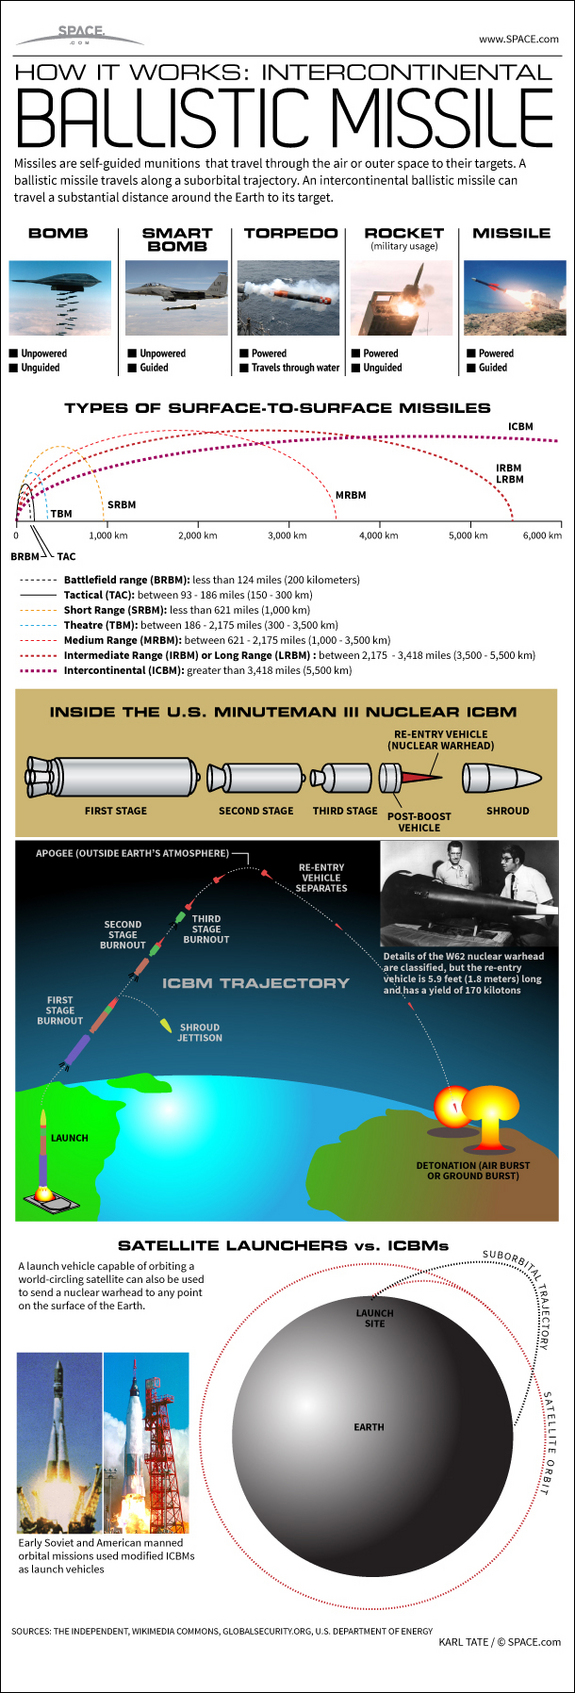 See how intercontinental ballistic missiles send nuclear warheads to any point on Earth, in this SPACE.com Infographic.